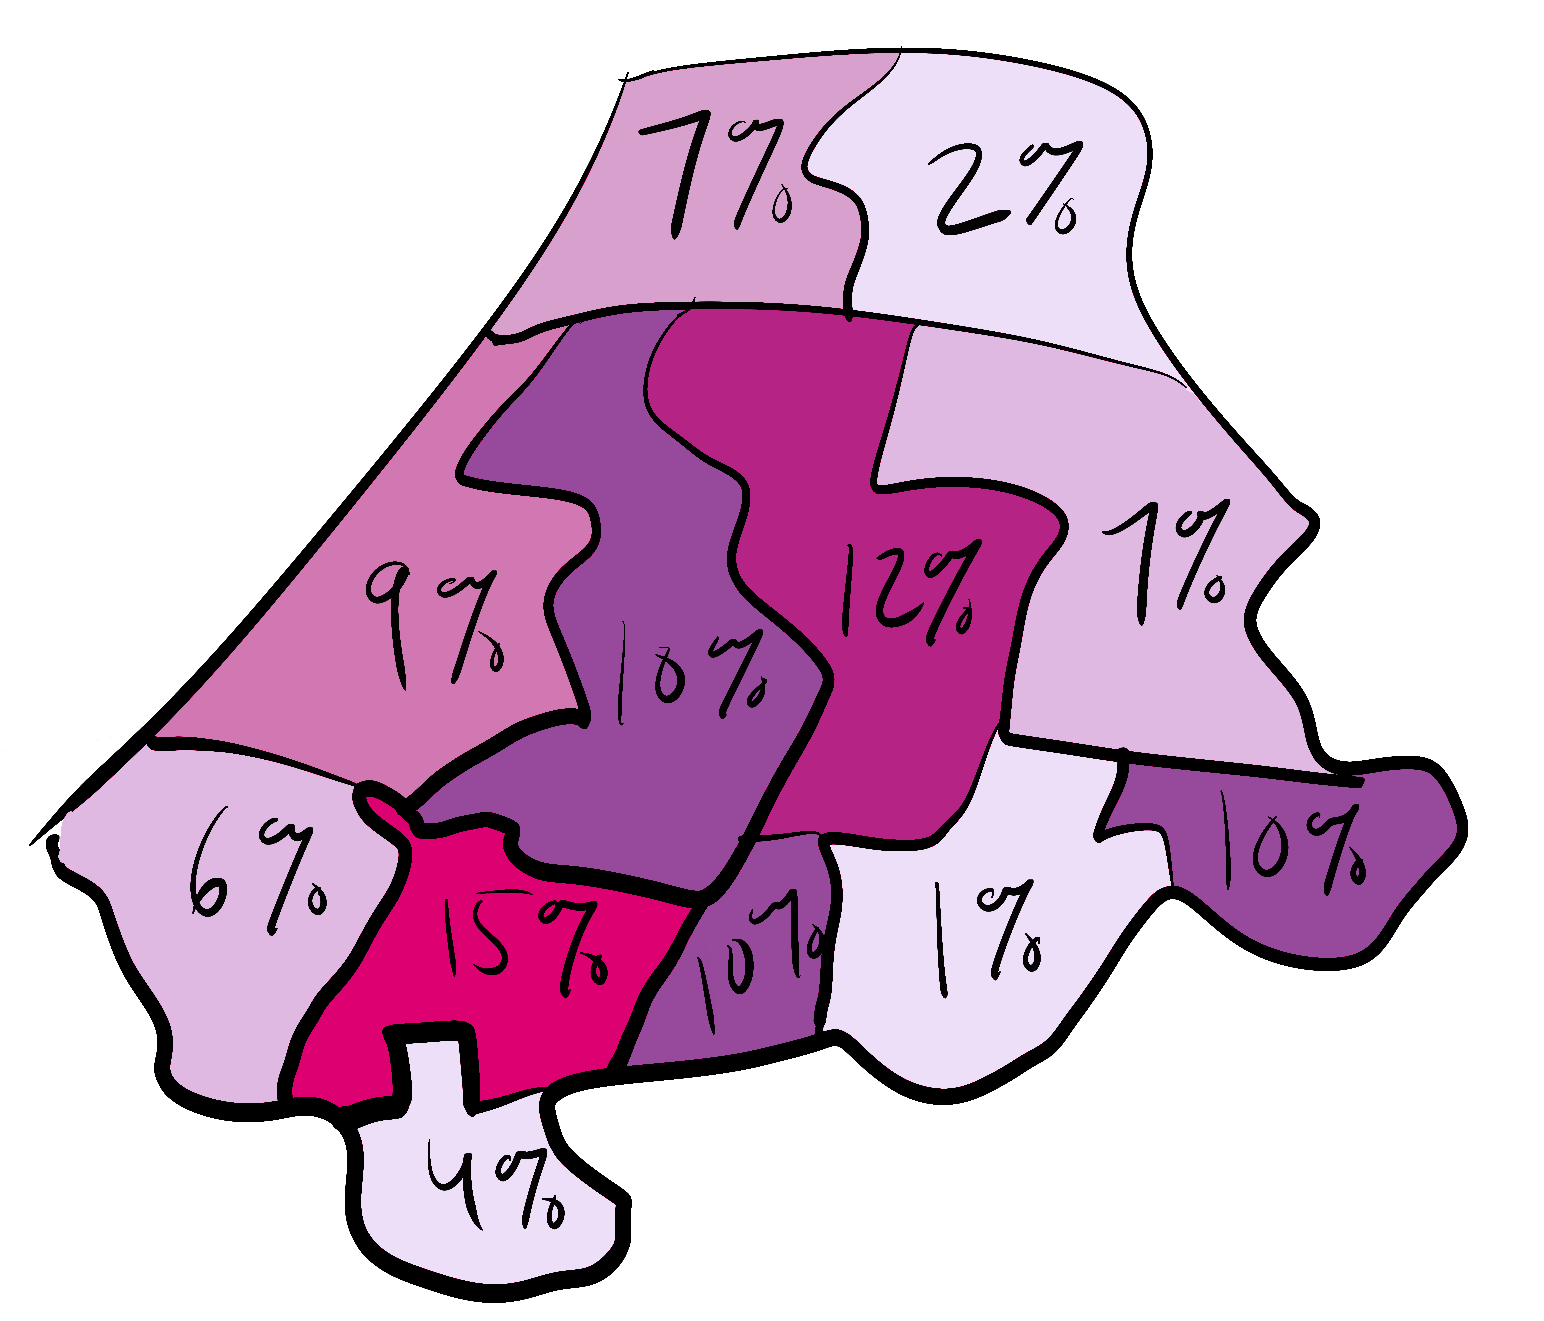 Sketch of a hypothetical choropleth map showing different census tracts in different shades of pink depending on the percentage.